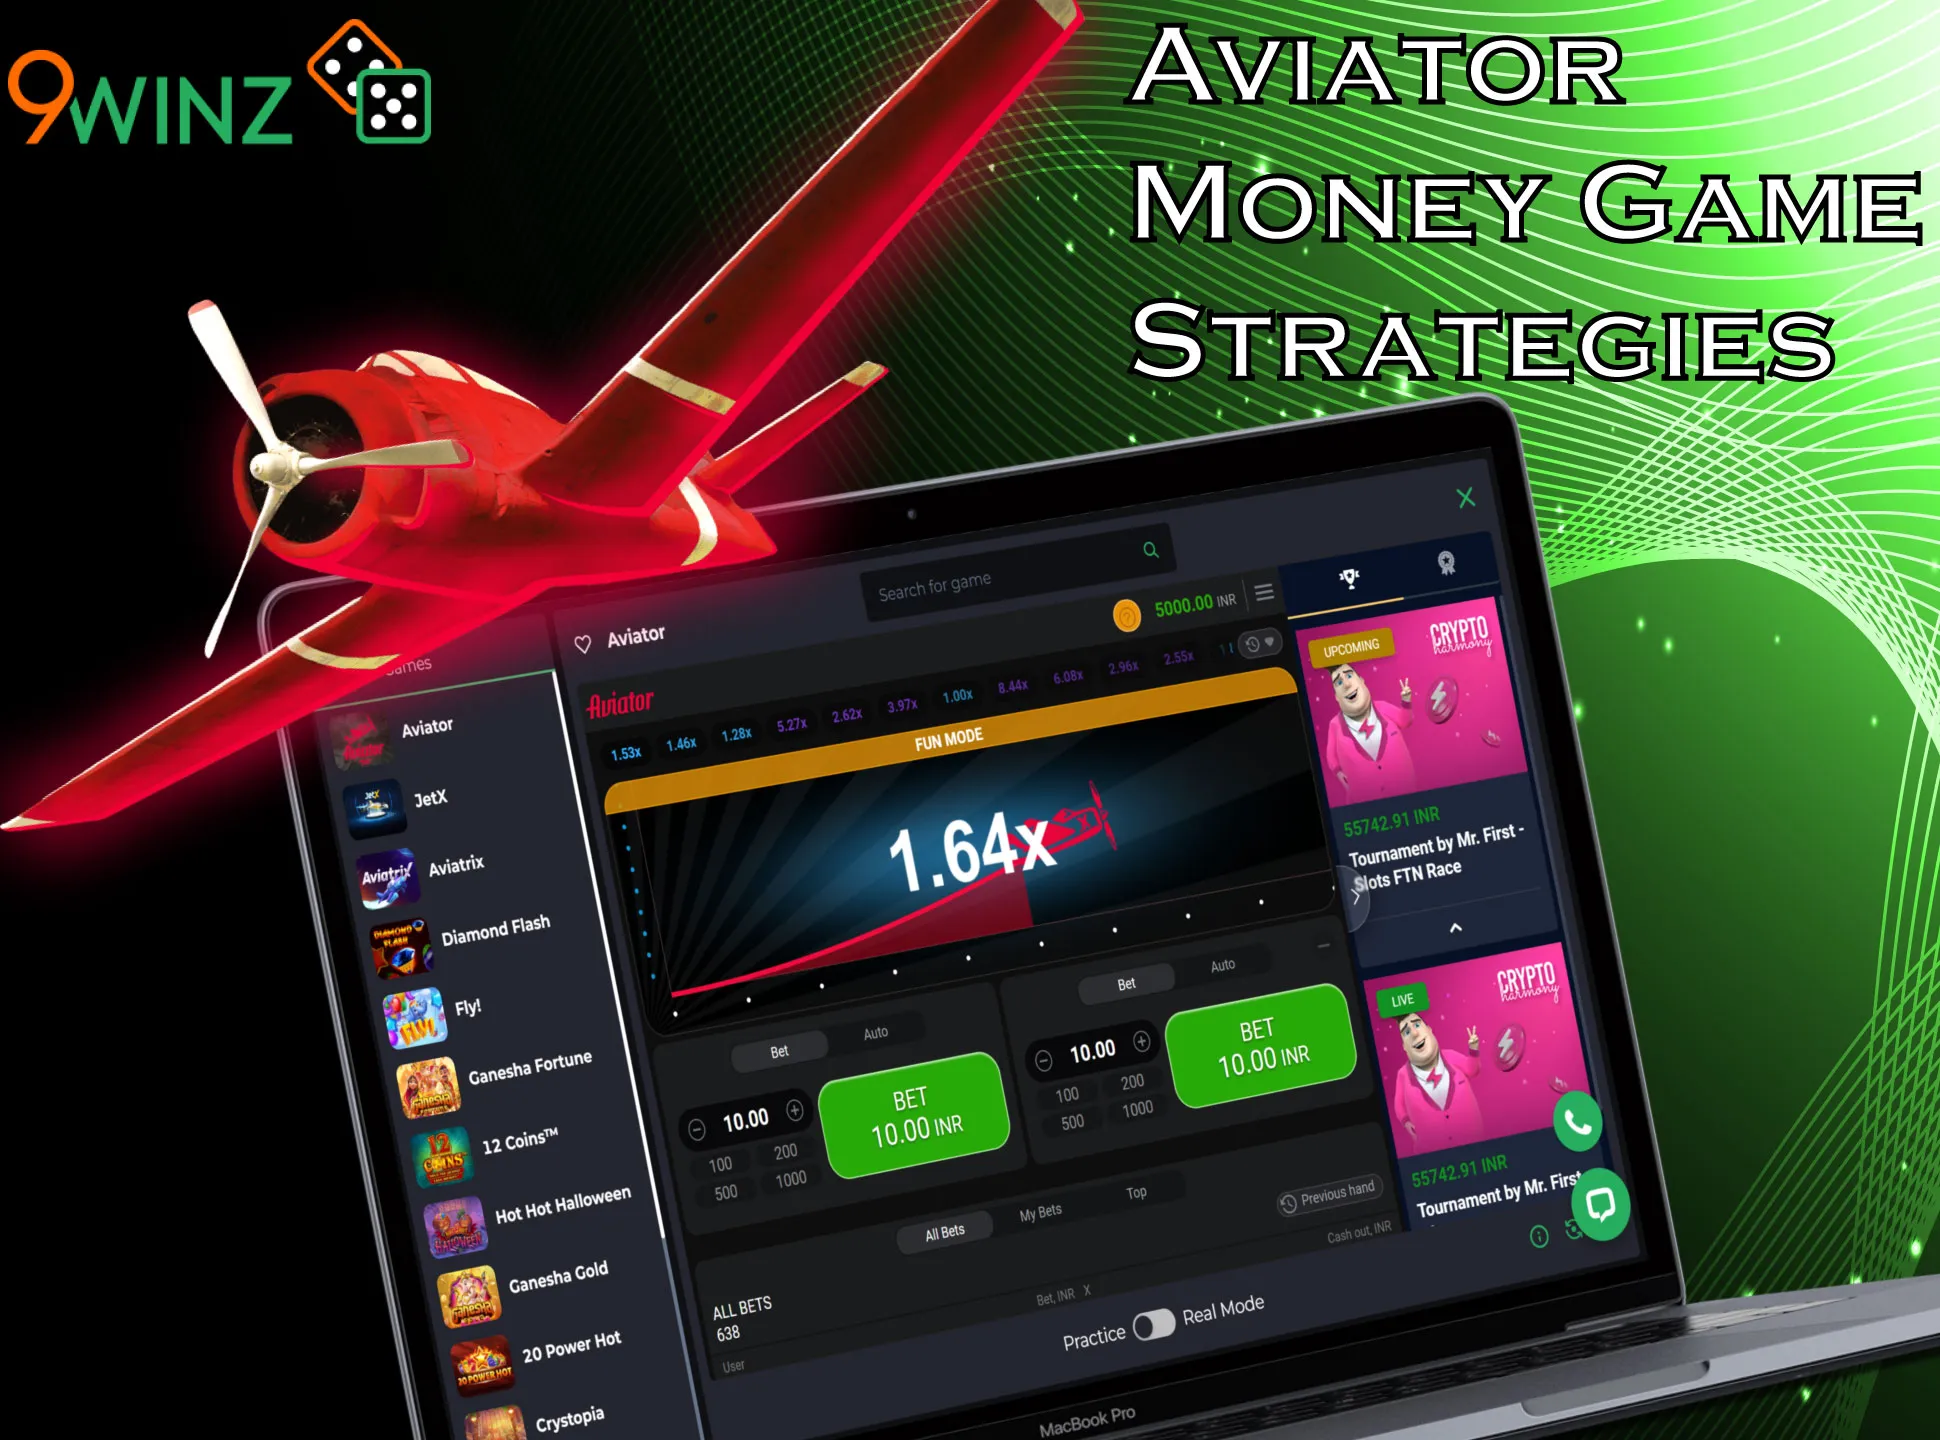 Follow these strategies to win Aviator game.